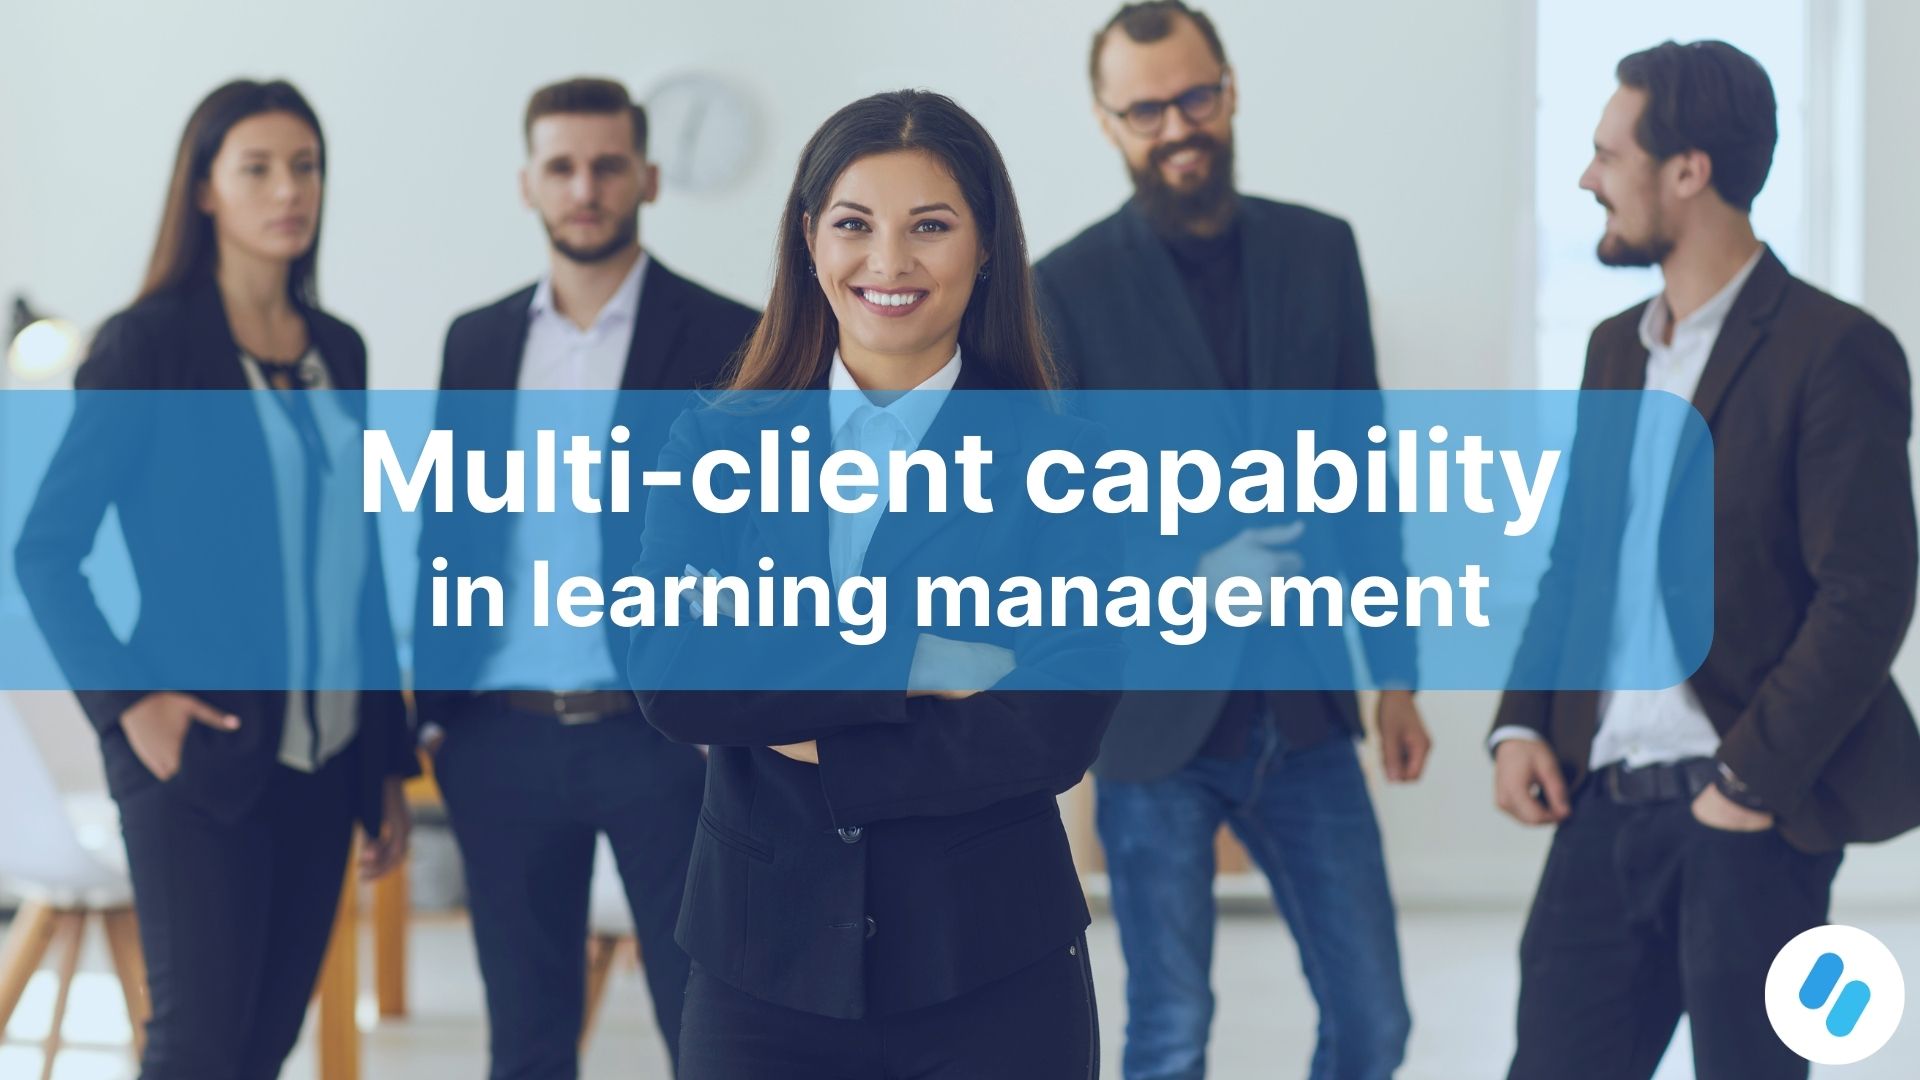 Multi-client capability in learning management